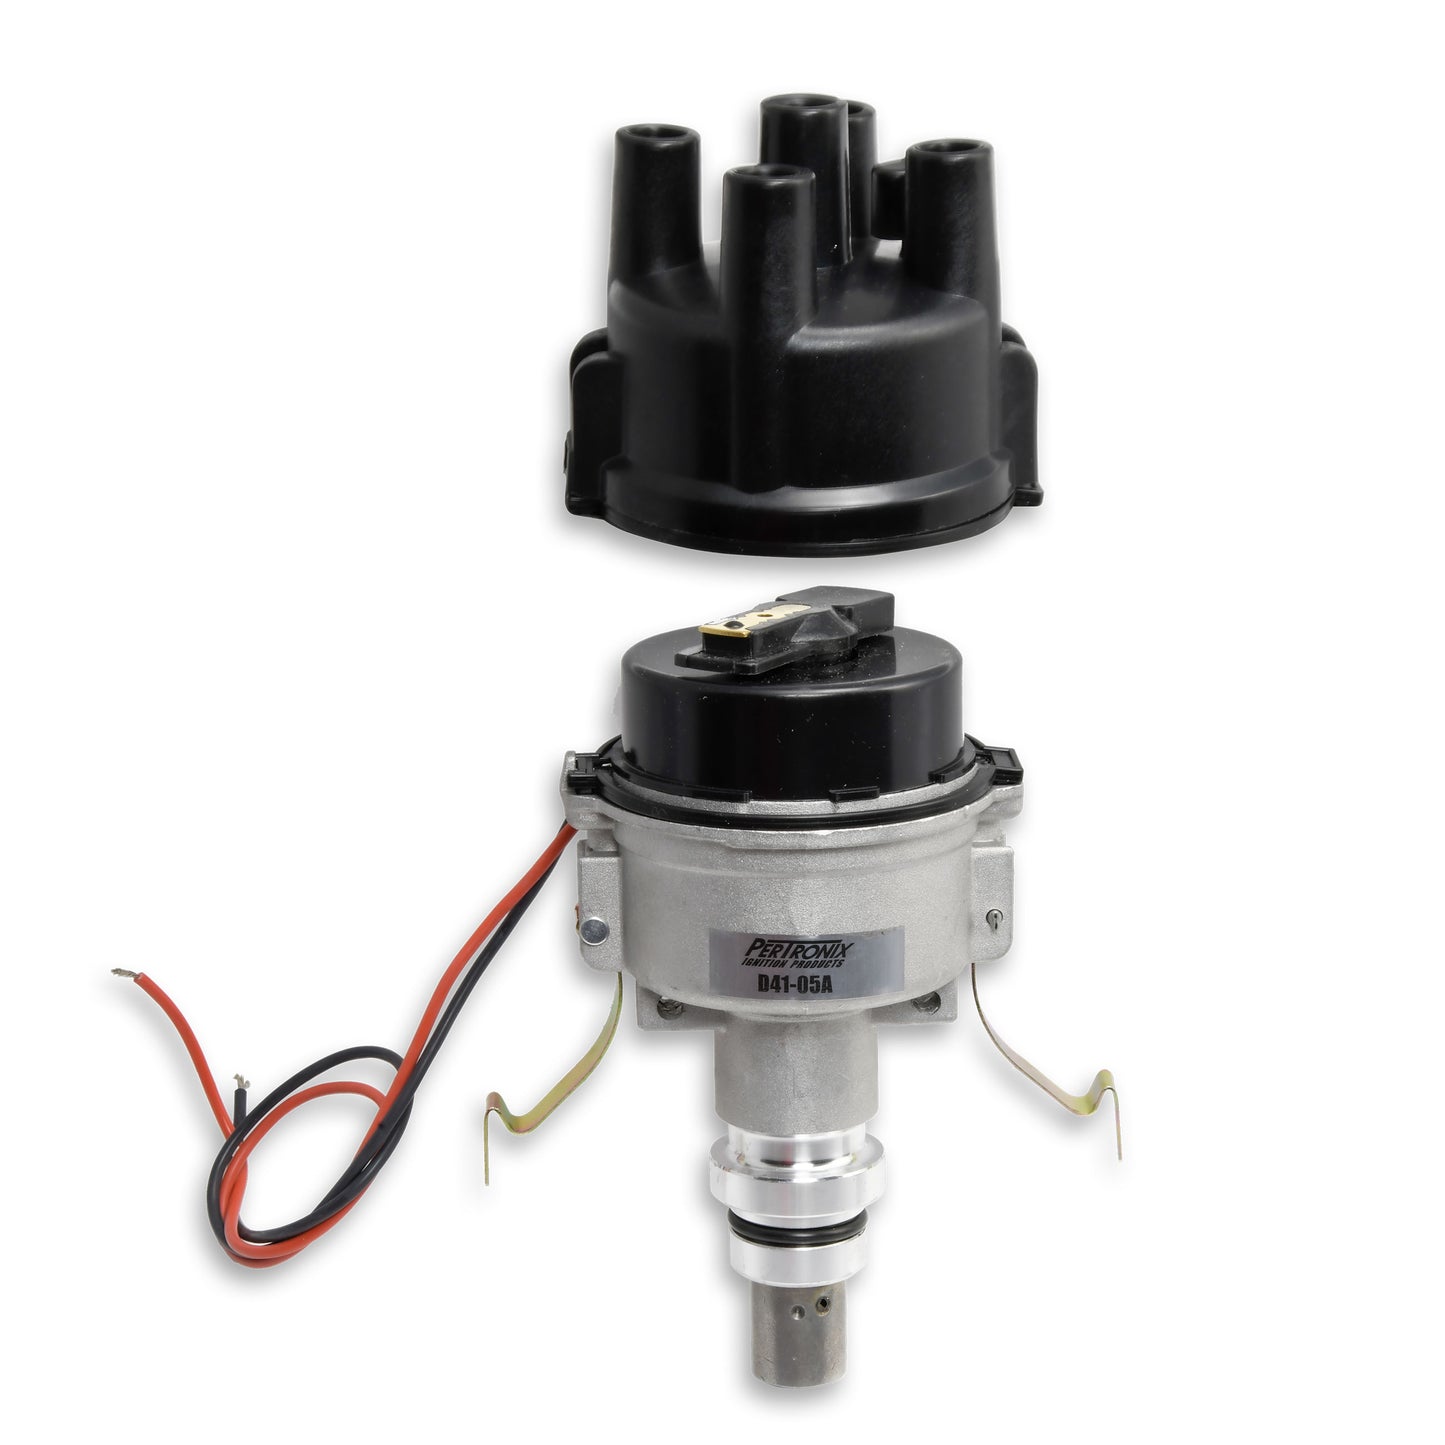 PerTronix D41-05A Distributor Industrial Continental 4 cyl